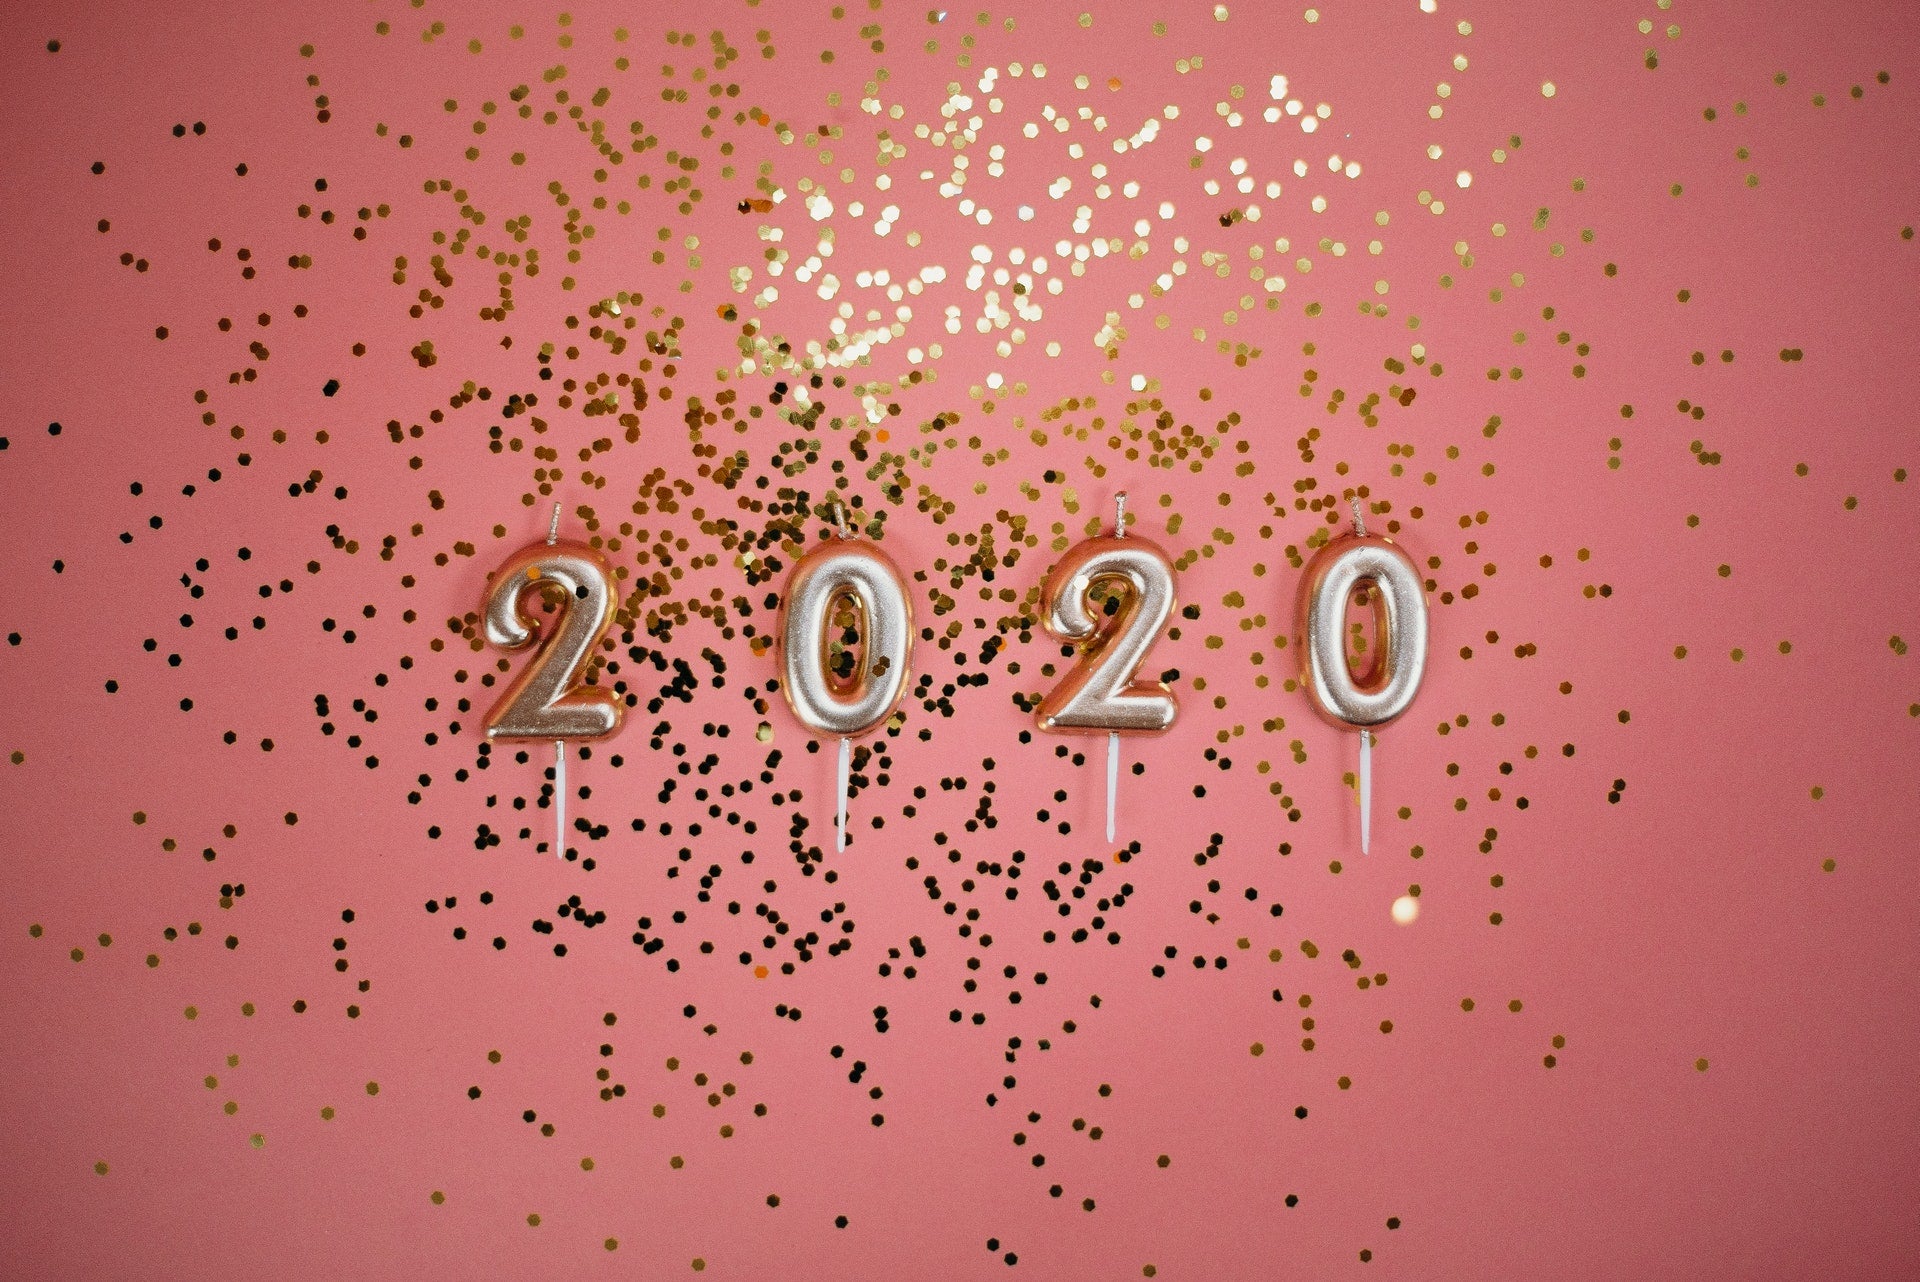 Recovering in 2020: The good, the bad,...and the best decision I’ve ever made